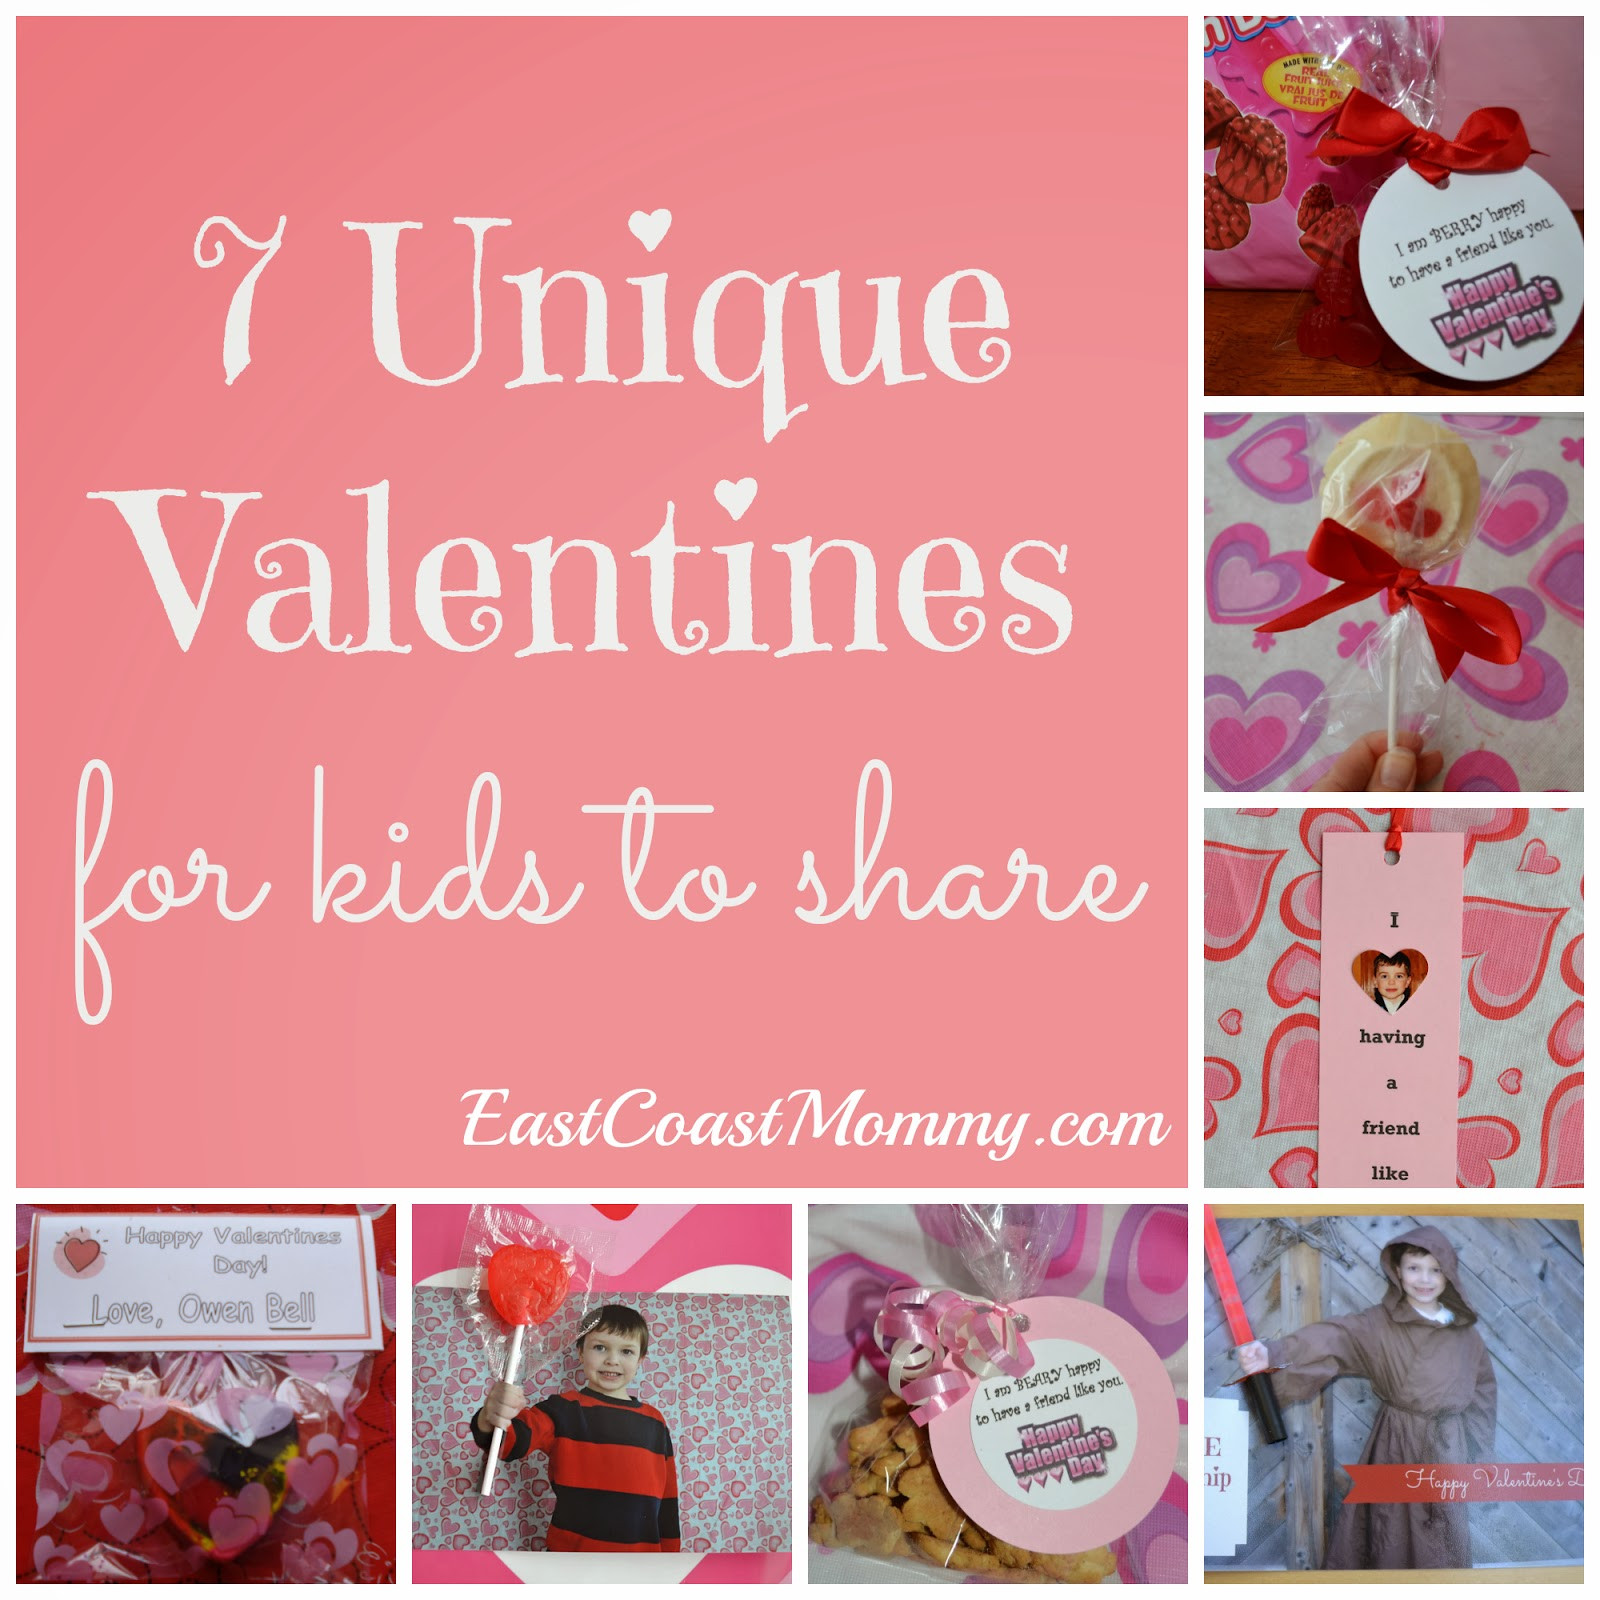 Valentine Creative Gift Ideas
 East Coast Mommy 7 Unique Valentines for kids to share